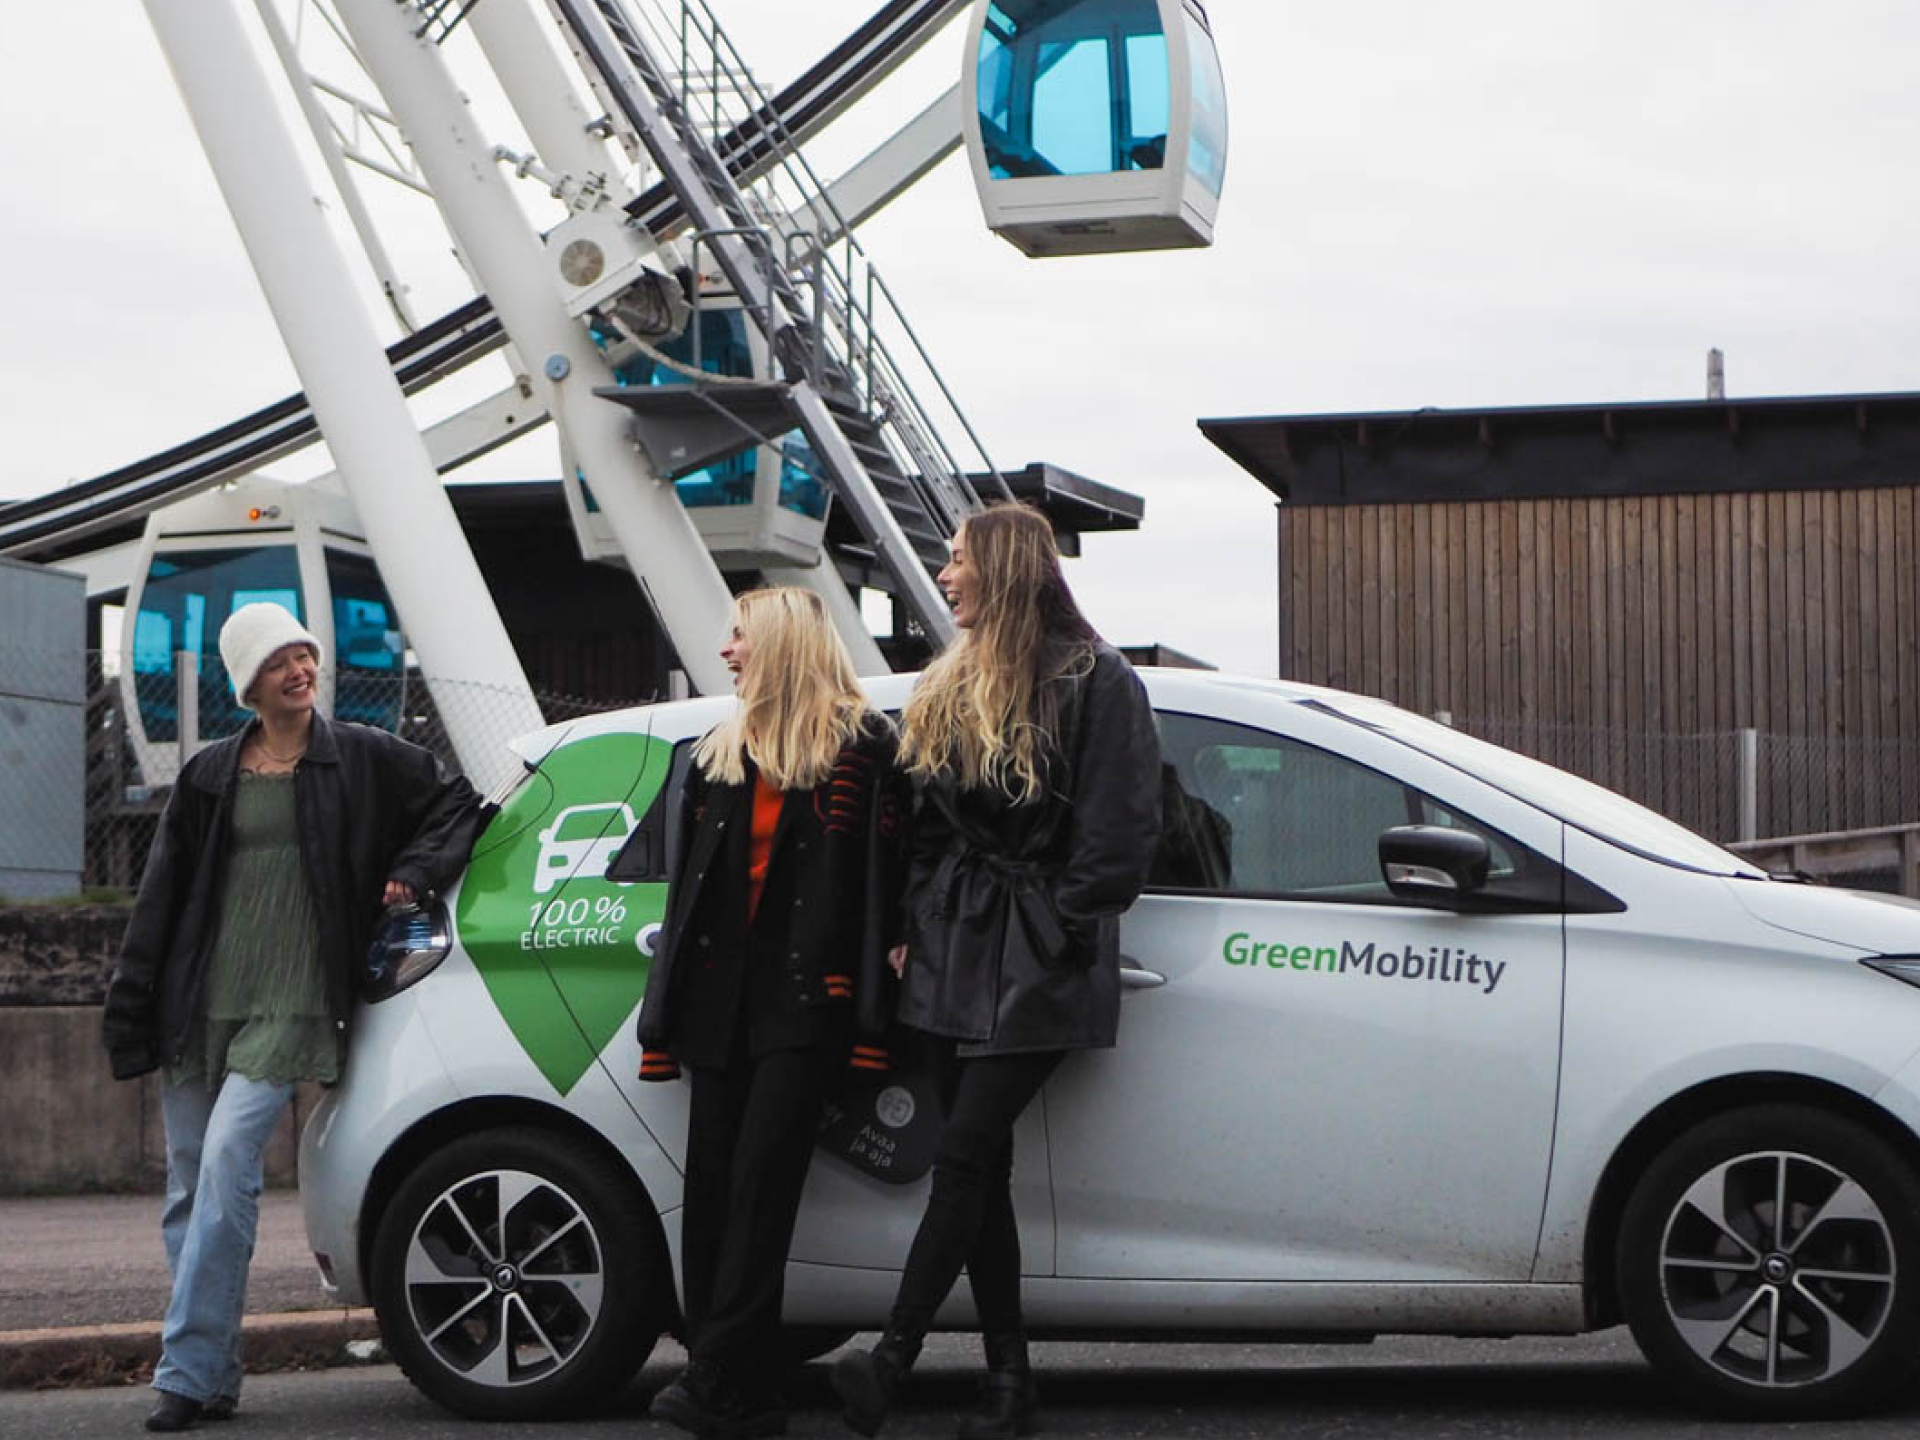 An electric car is a comfortable way to continue your trip after the train journey.